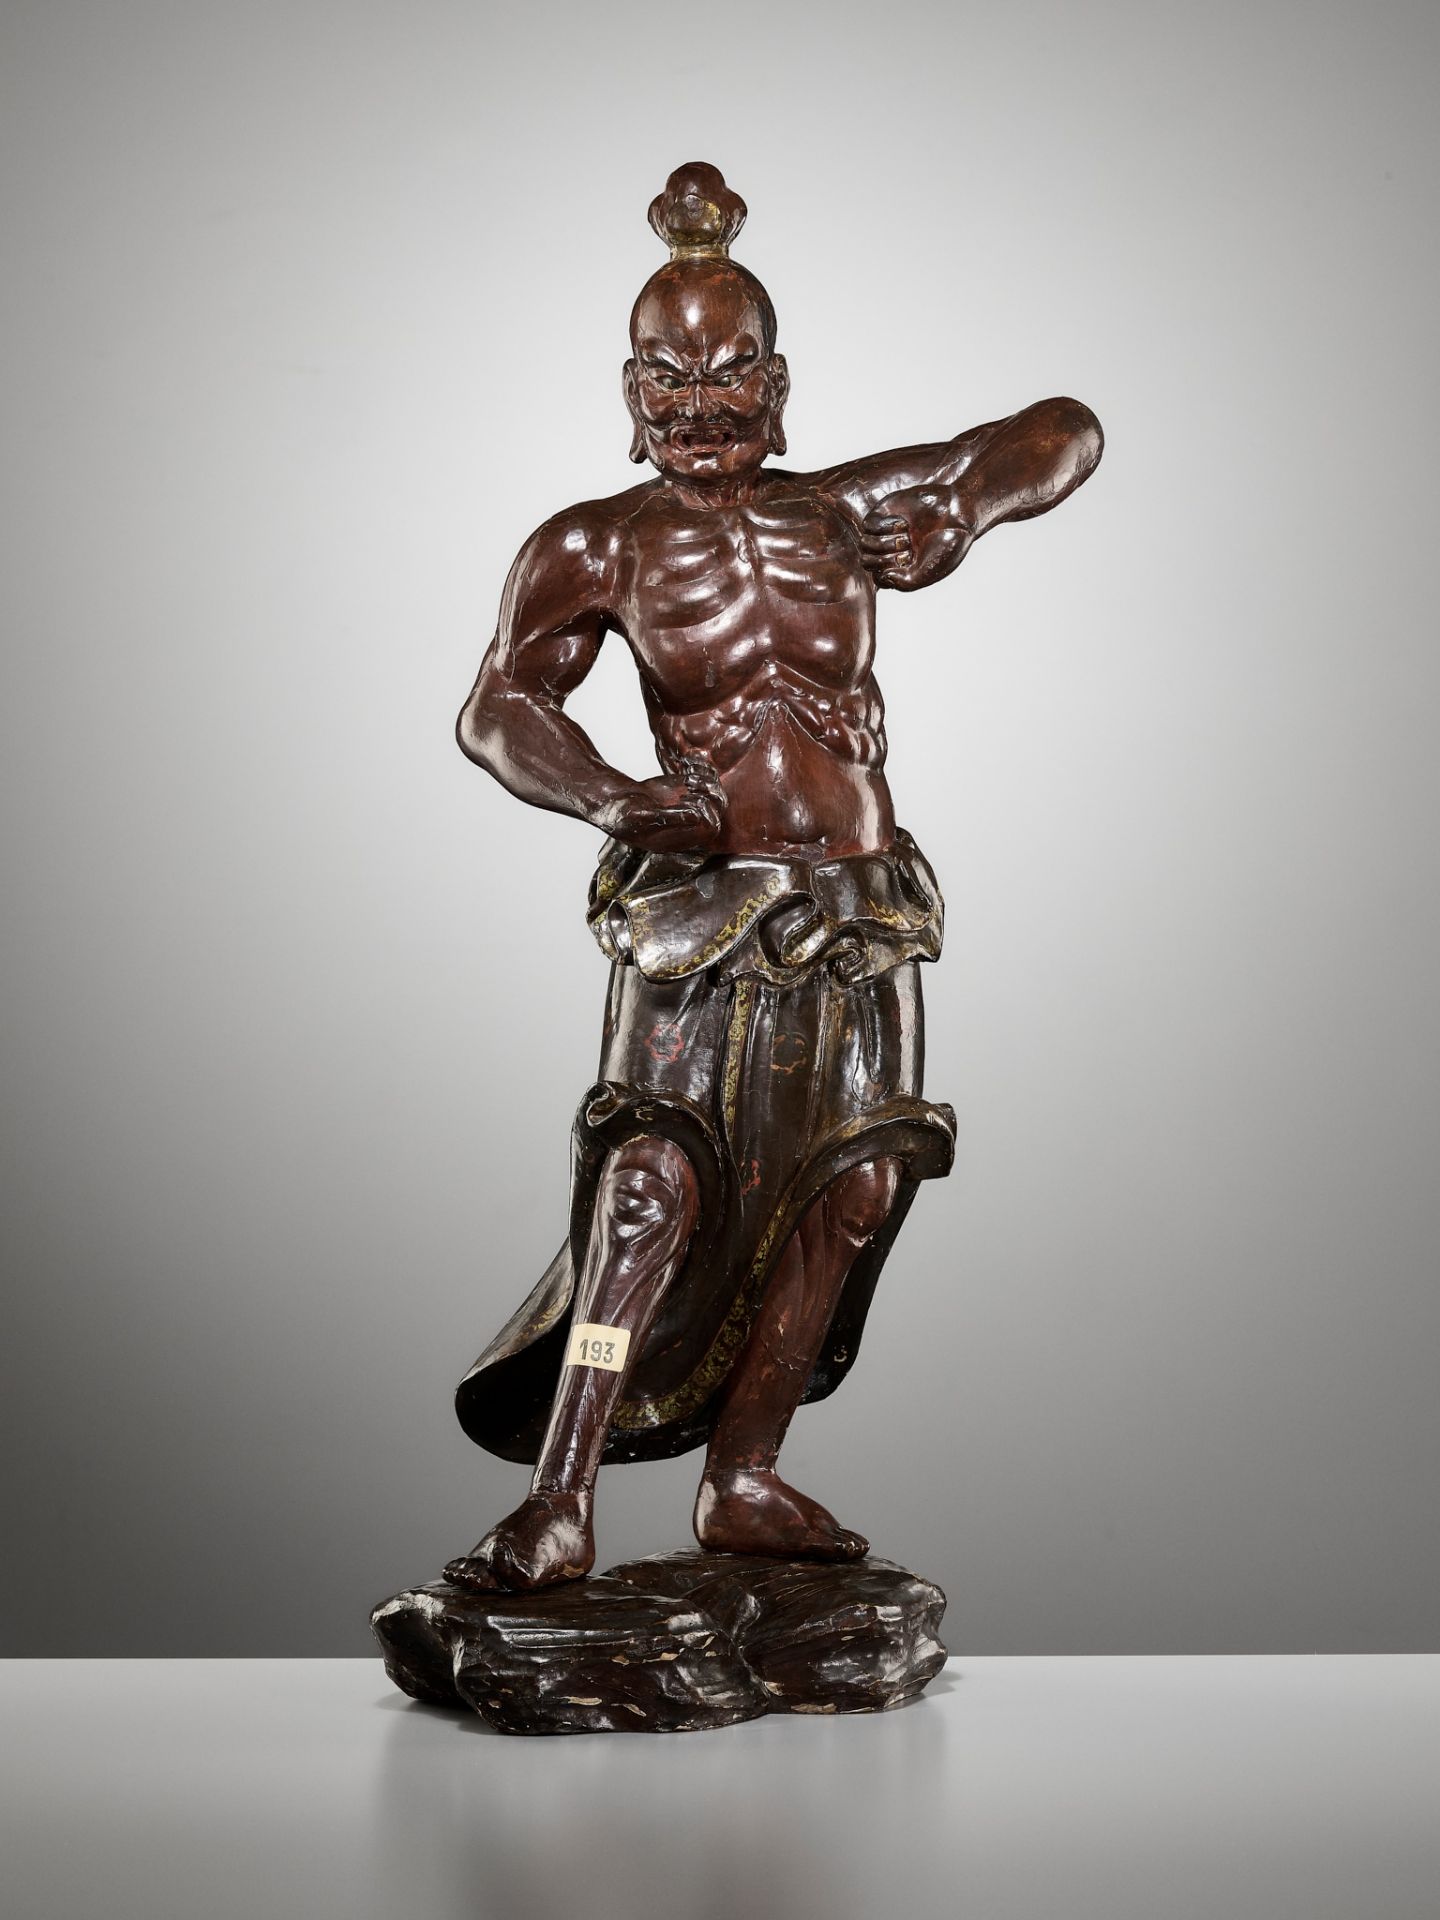 A LARGE AND IMPRESSIVE LACQUERED WOOD FIGURE OF A NIO GUARDIAN - Image 3 of 8